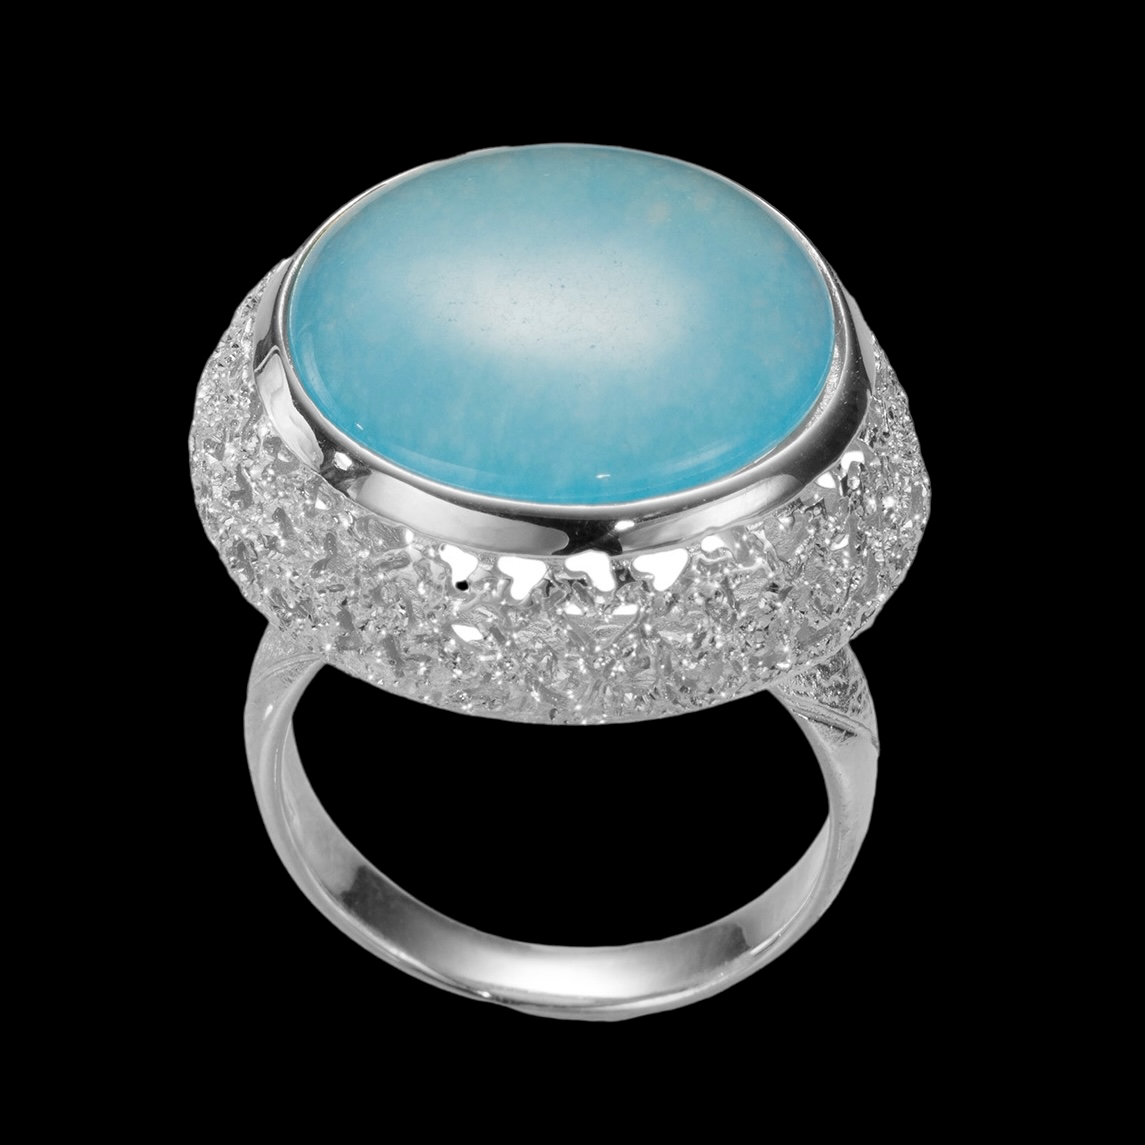 Created silver ring with a blue quartz stone